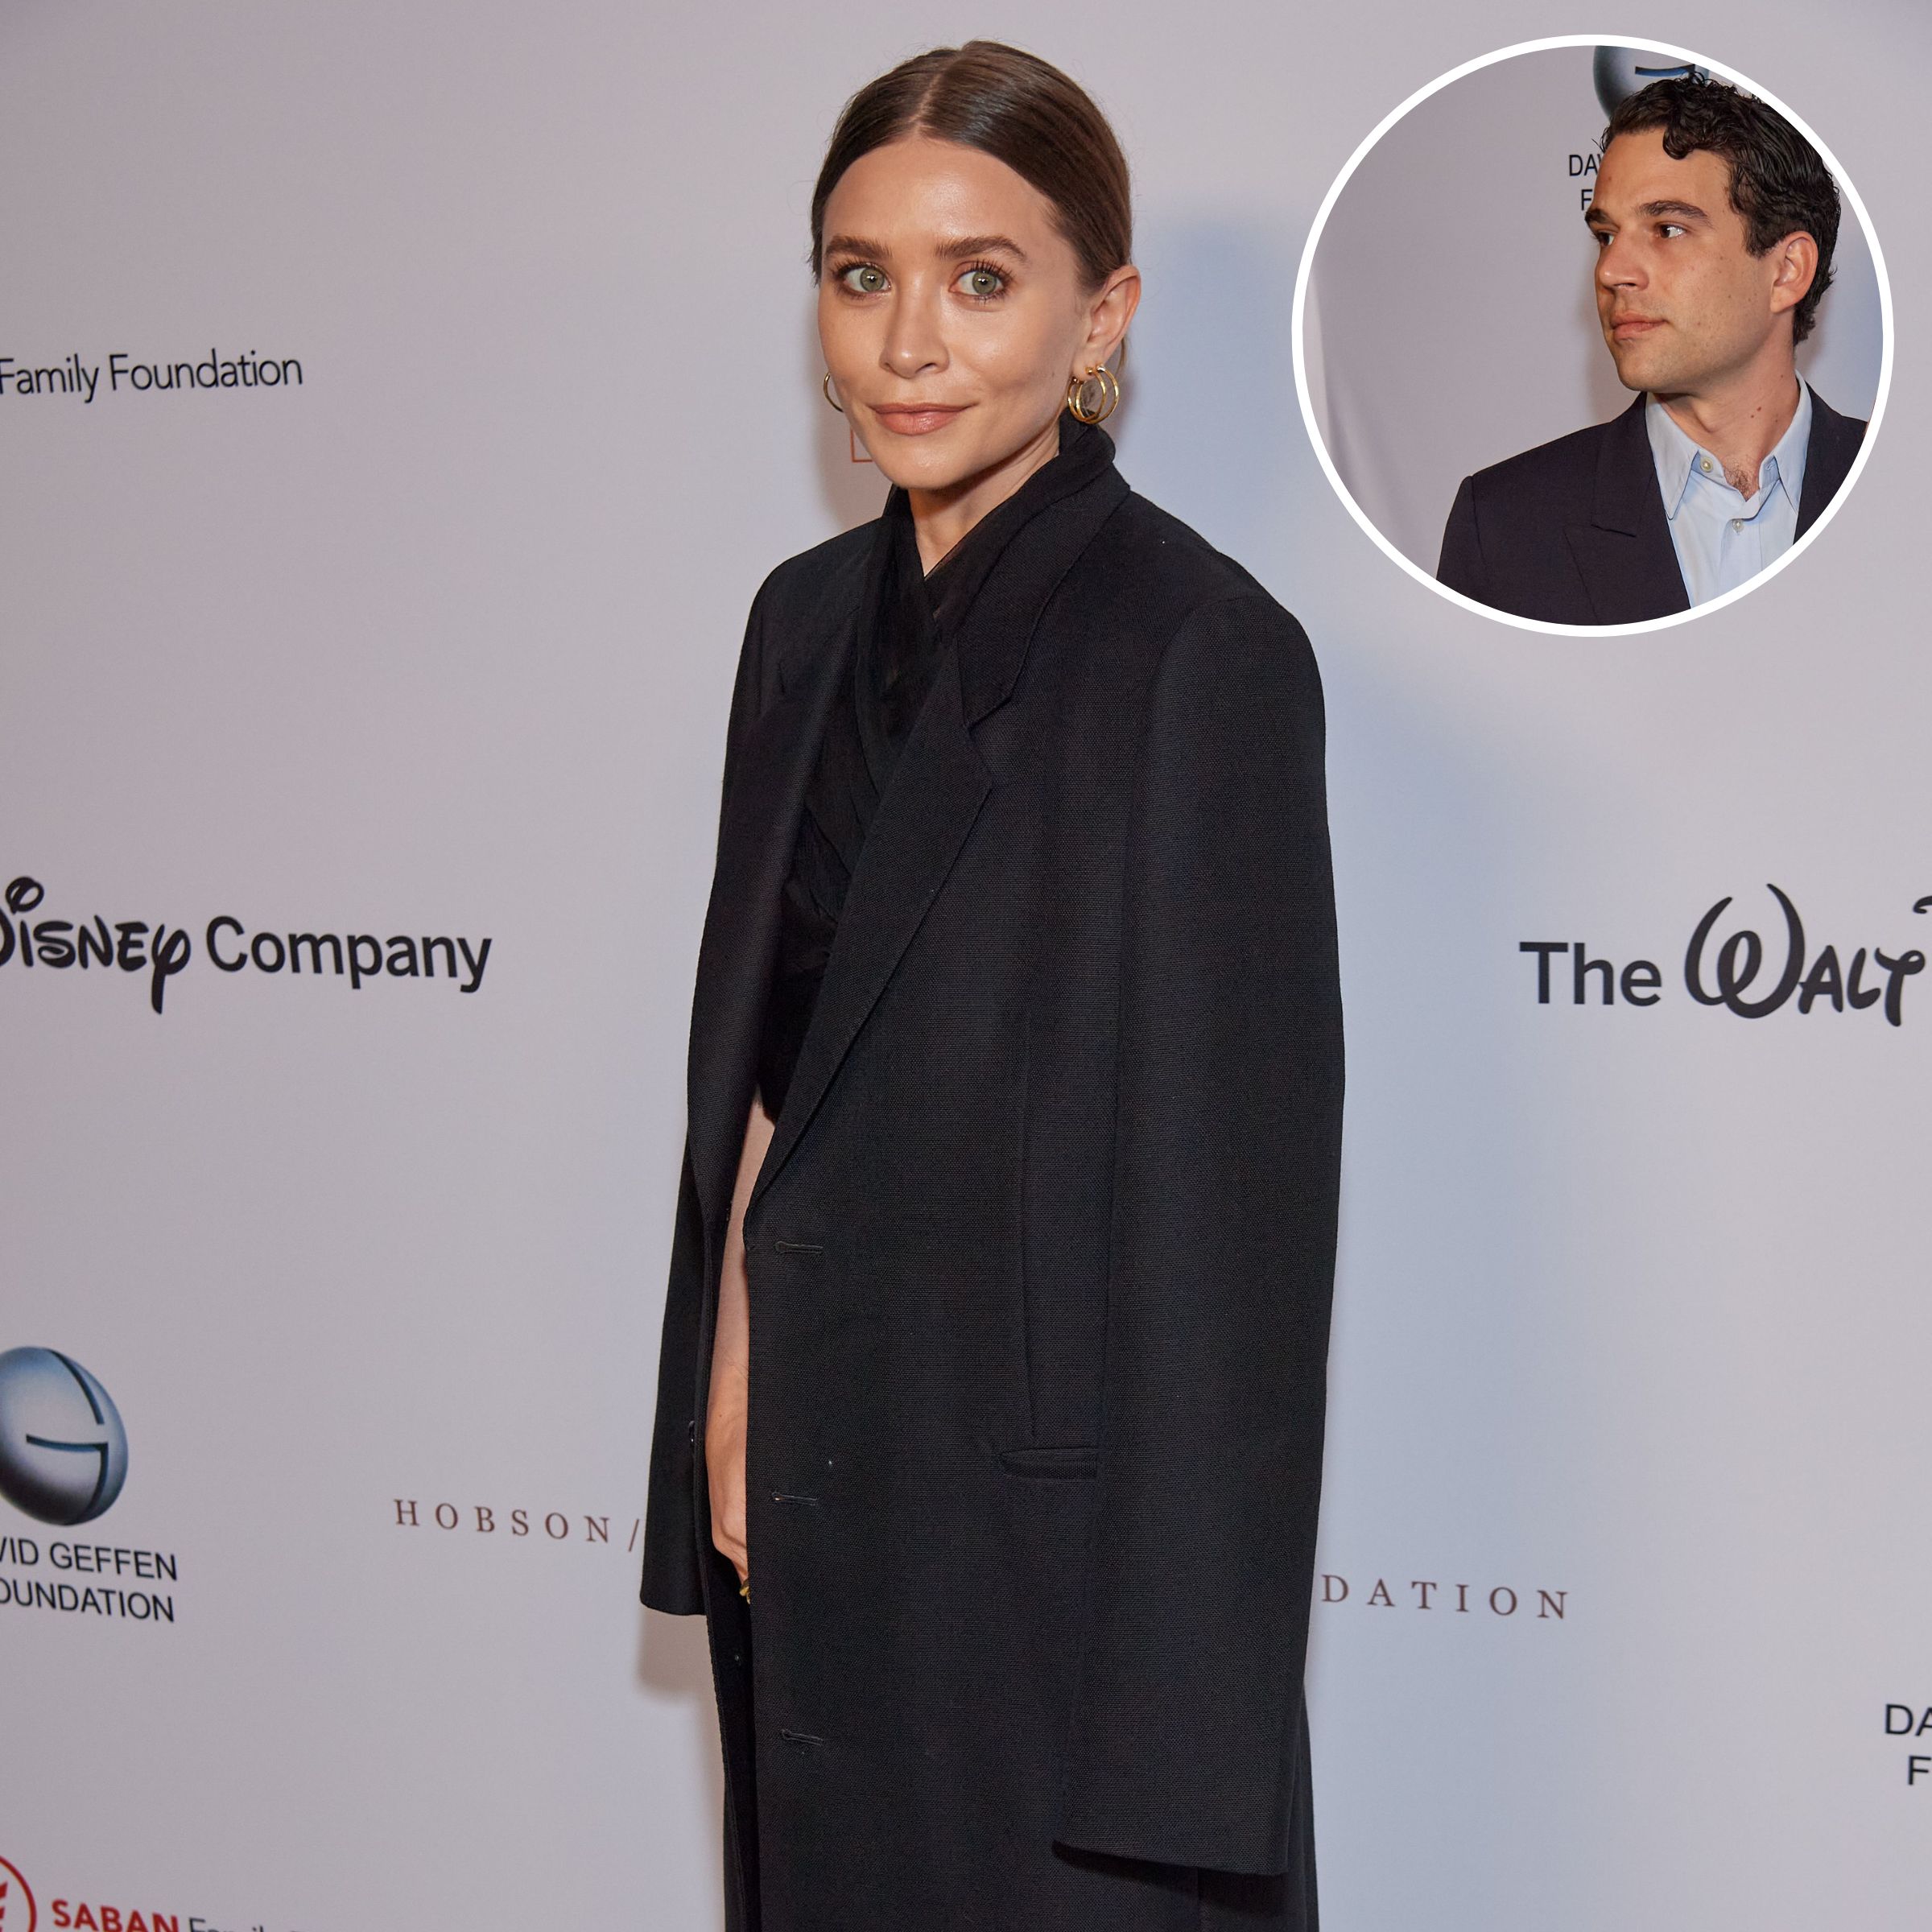 Ashley Olsen and Boyfriend Louis Eisner Show Sweet PDA in Rare Outing: Pictures